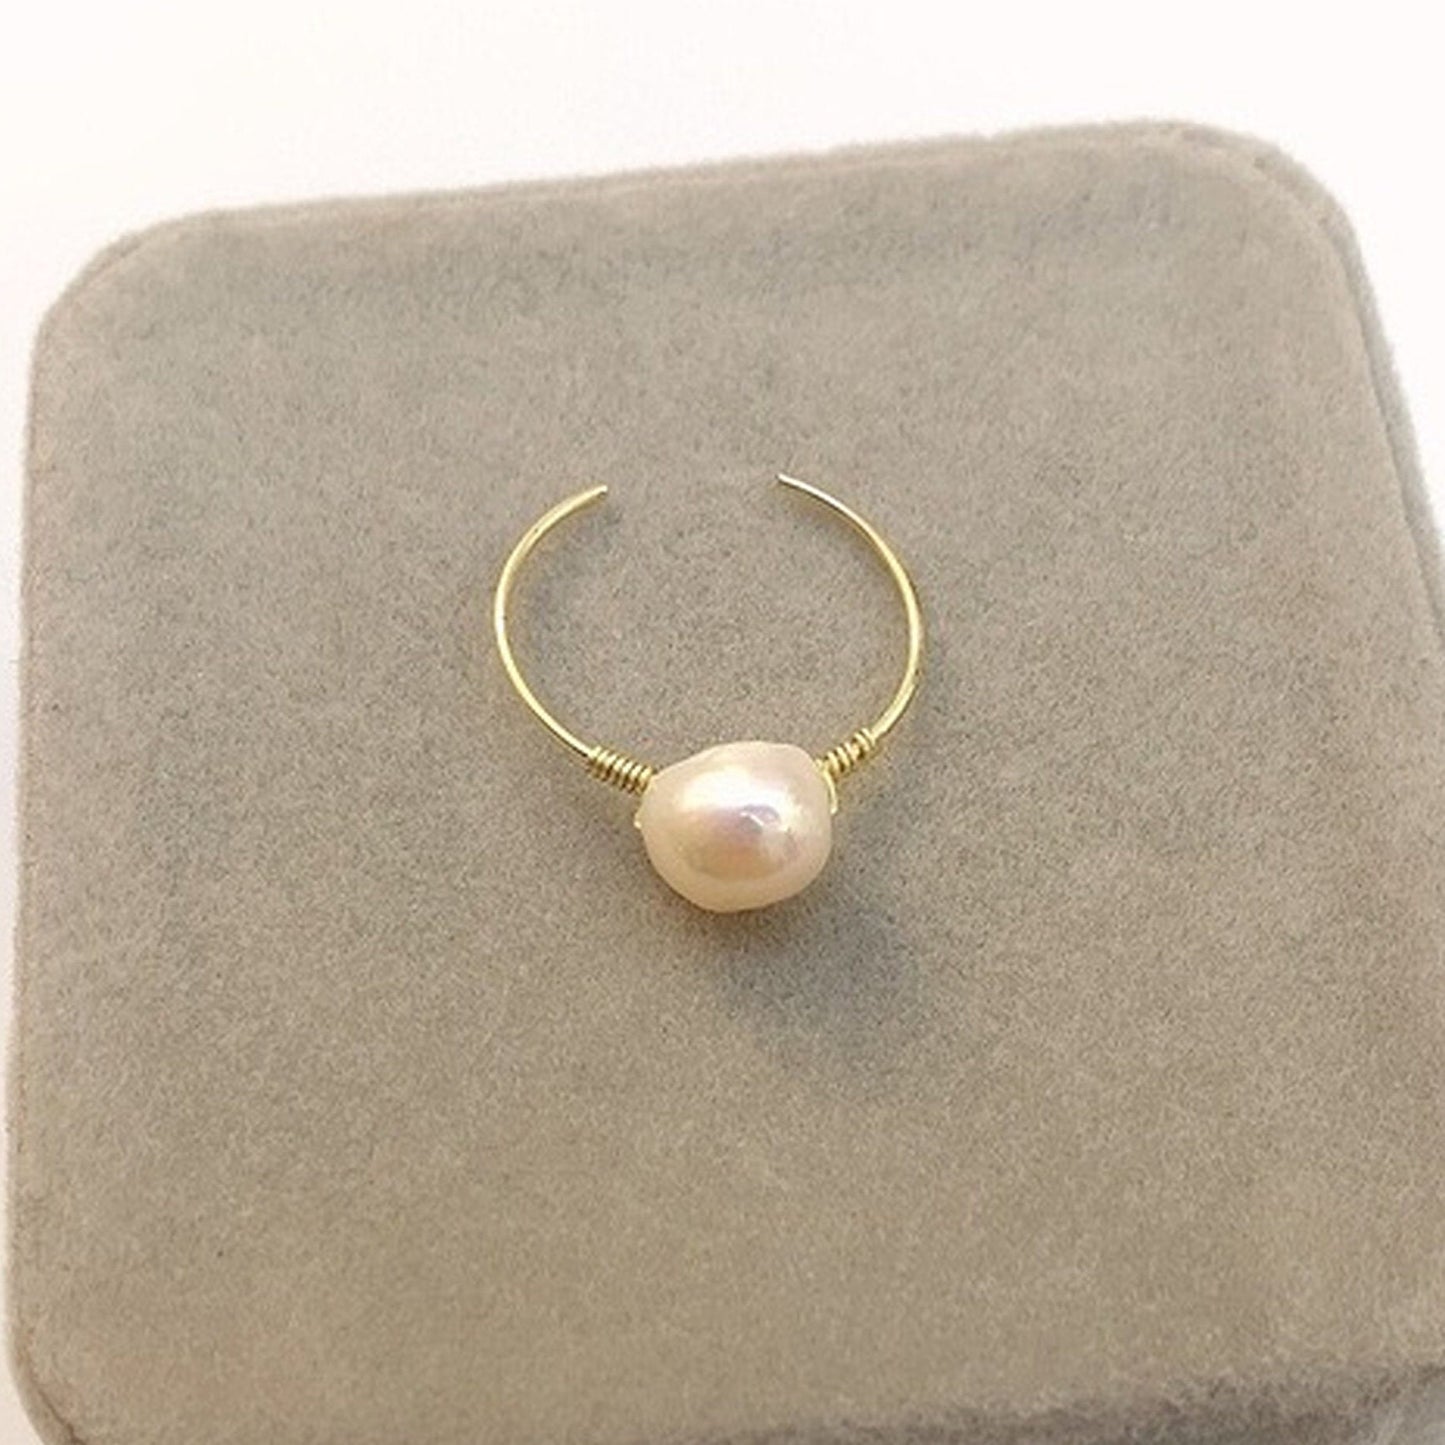 Natural Pearl Ring, Handmade Pearl Ring, Gold Pearl Twist Ring, Pearl Statement Cocktail Ring, Baroque Pearl Ring, Open Ring, Birthdaty Gift